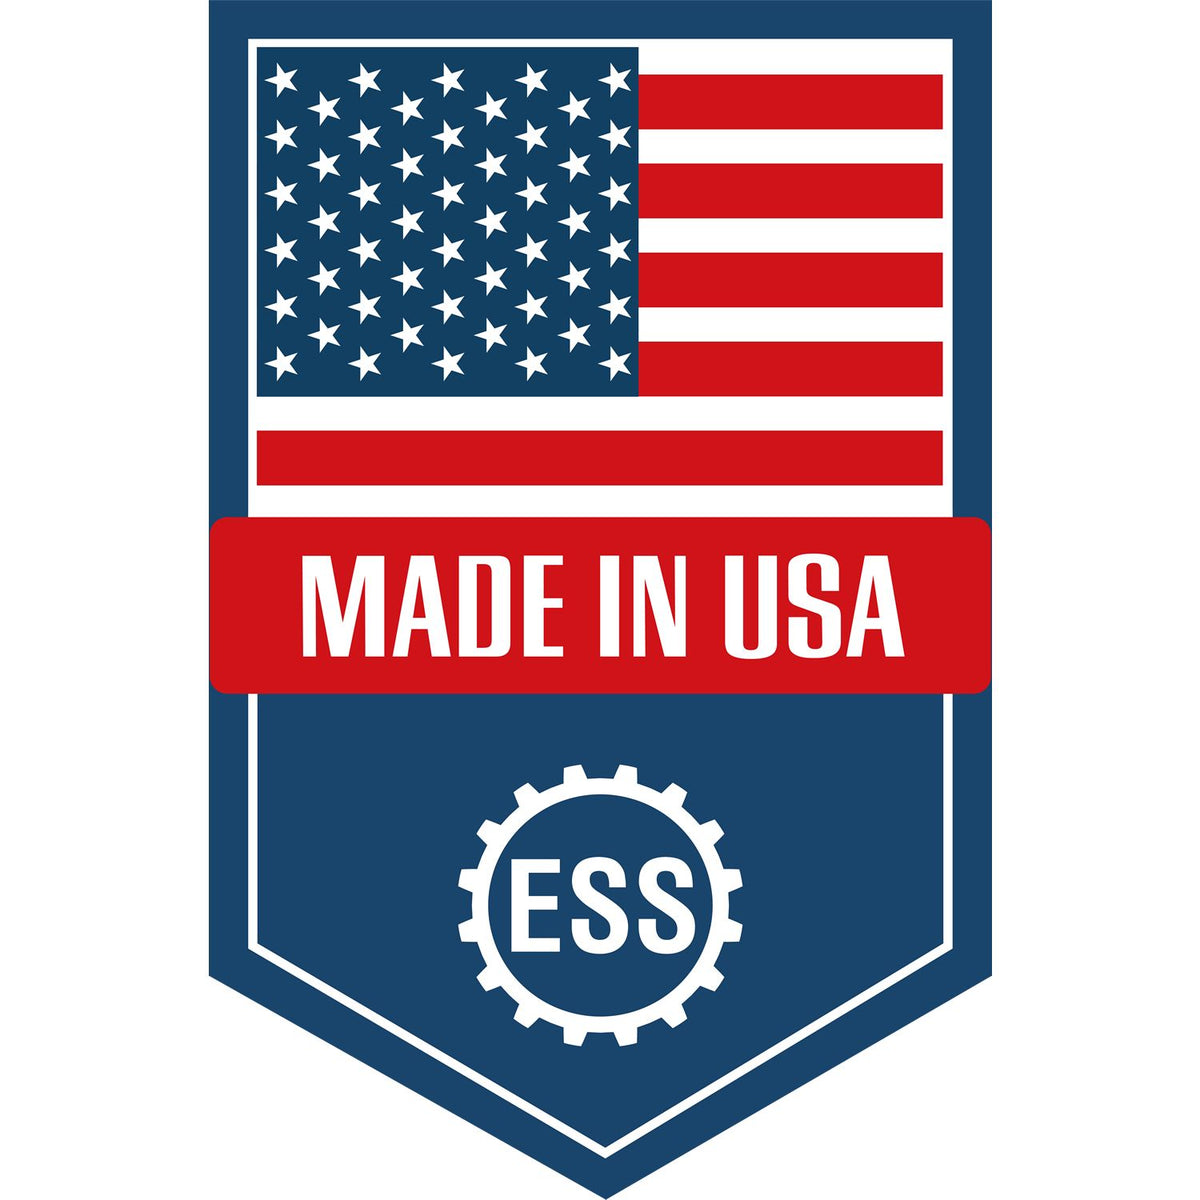 An icon or graphic with an american flag and text reading Made in USA for the Massachusetts Geologist Desk Seal